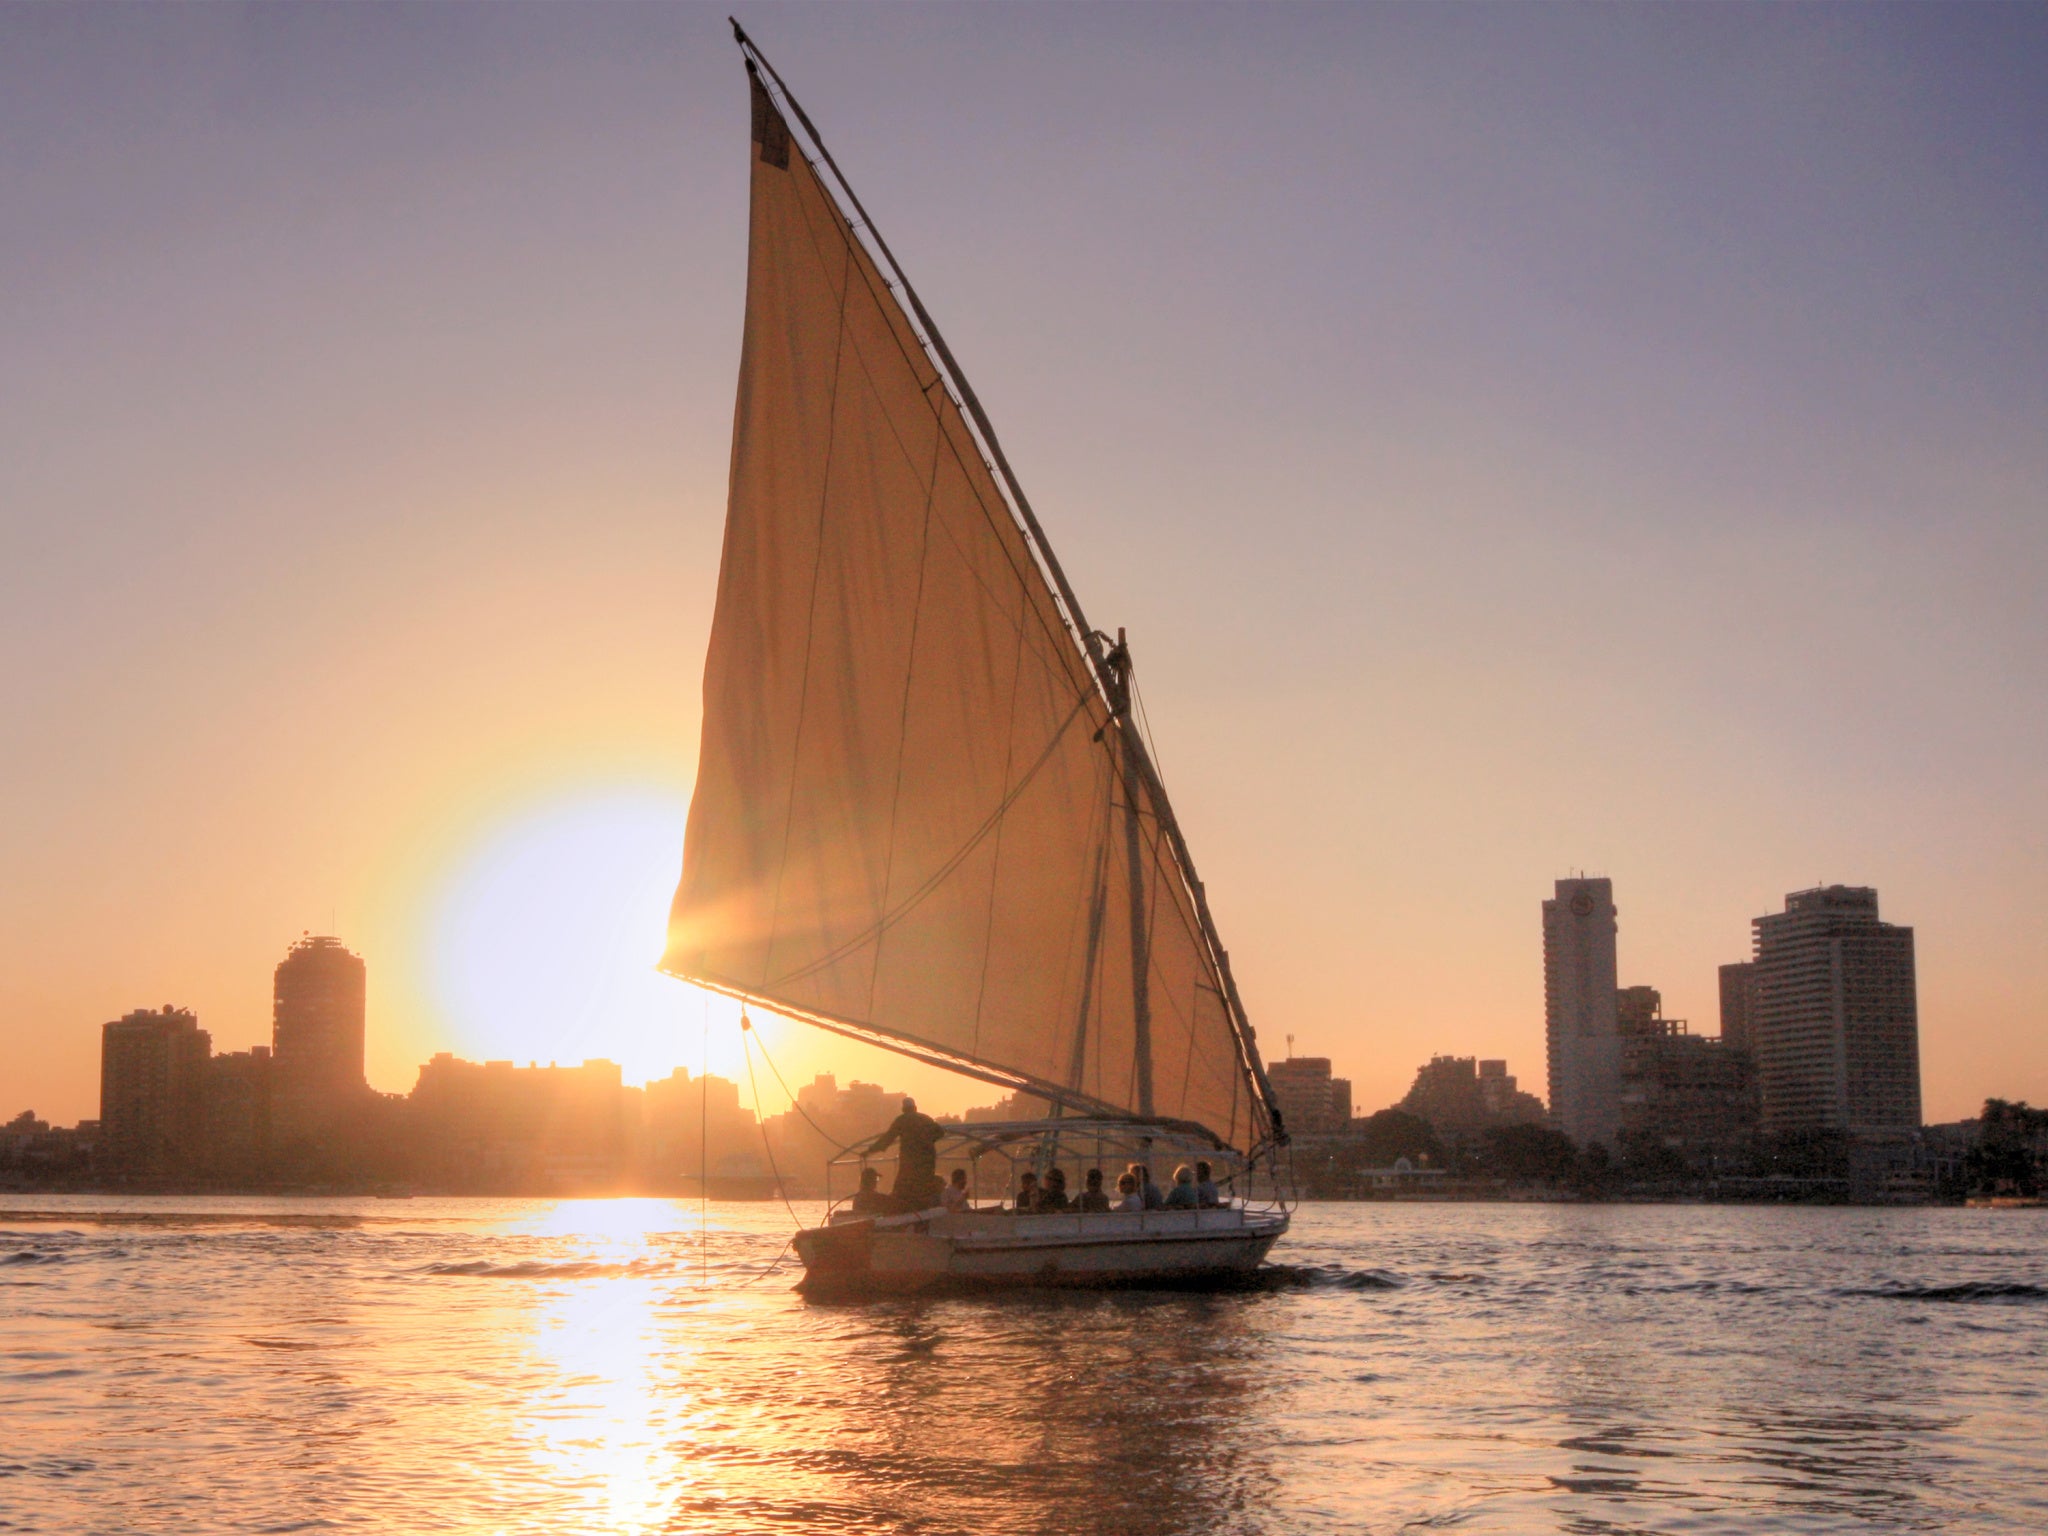 The Nile is one of the world’s best-known rivers